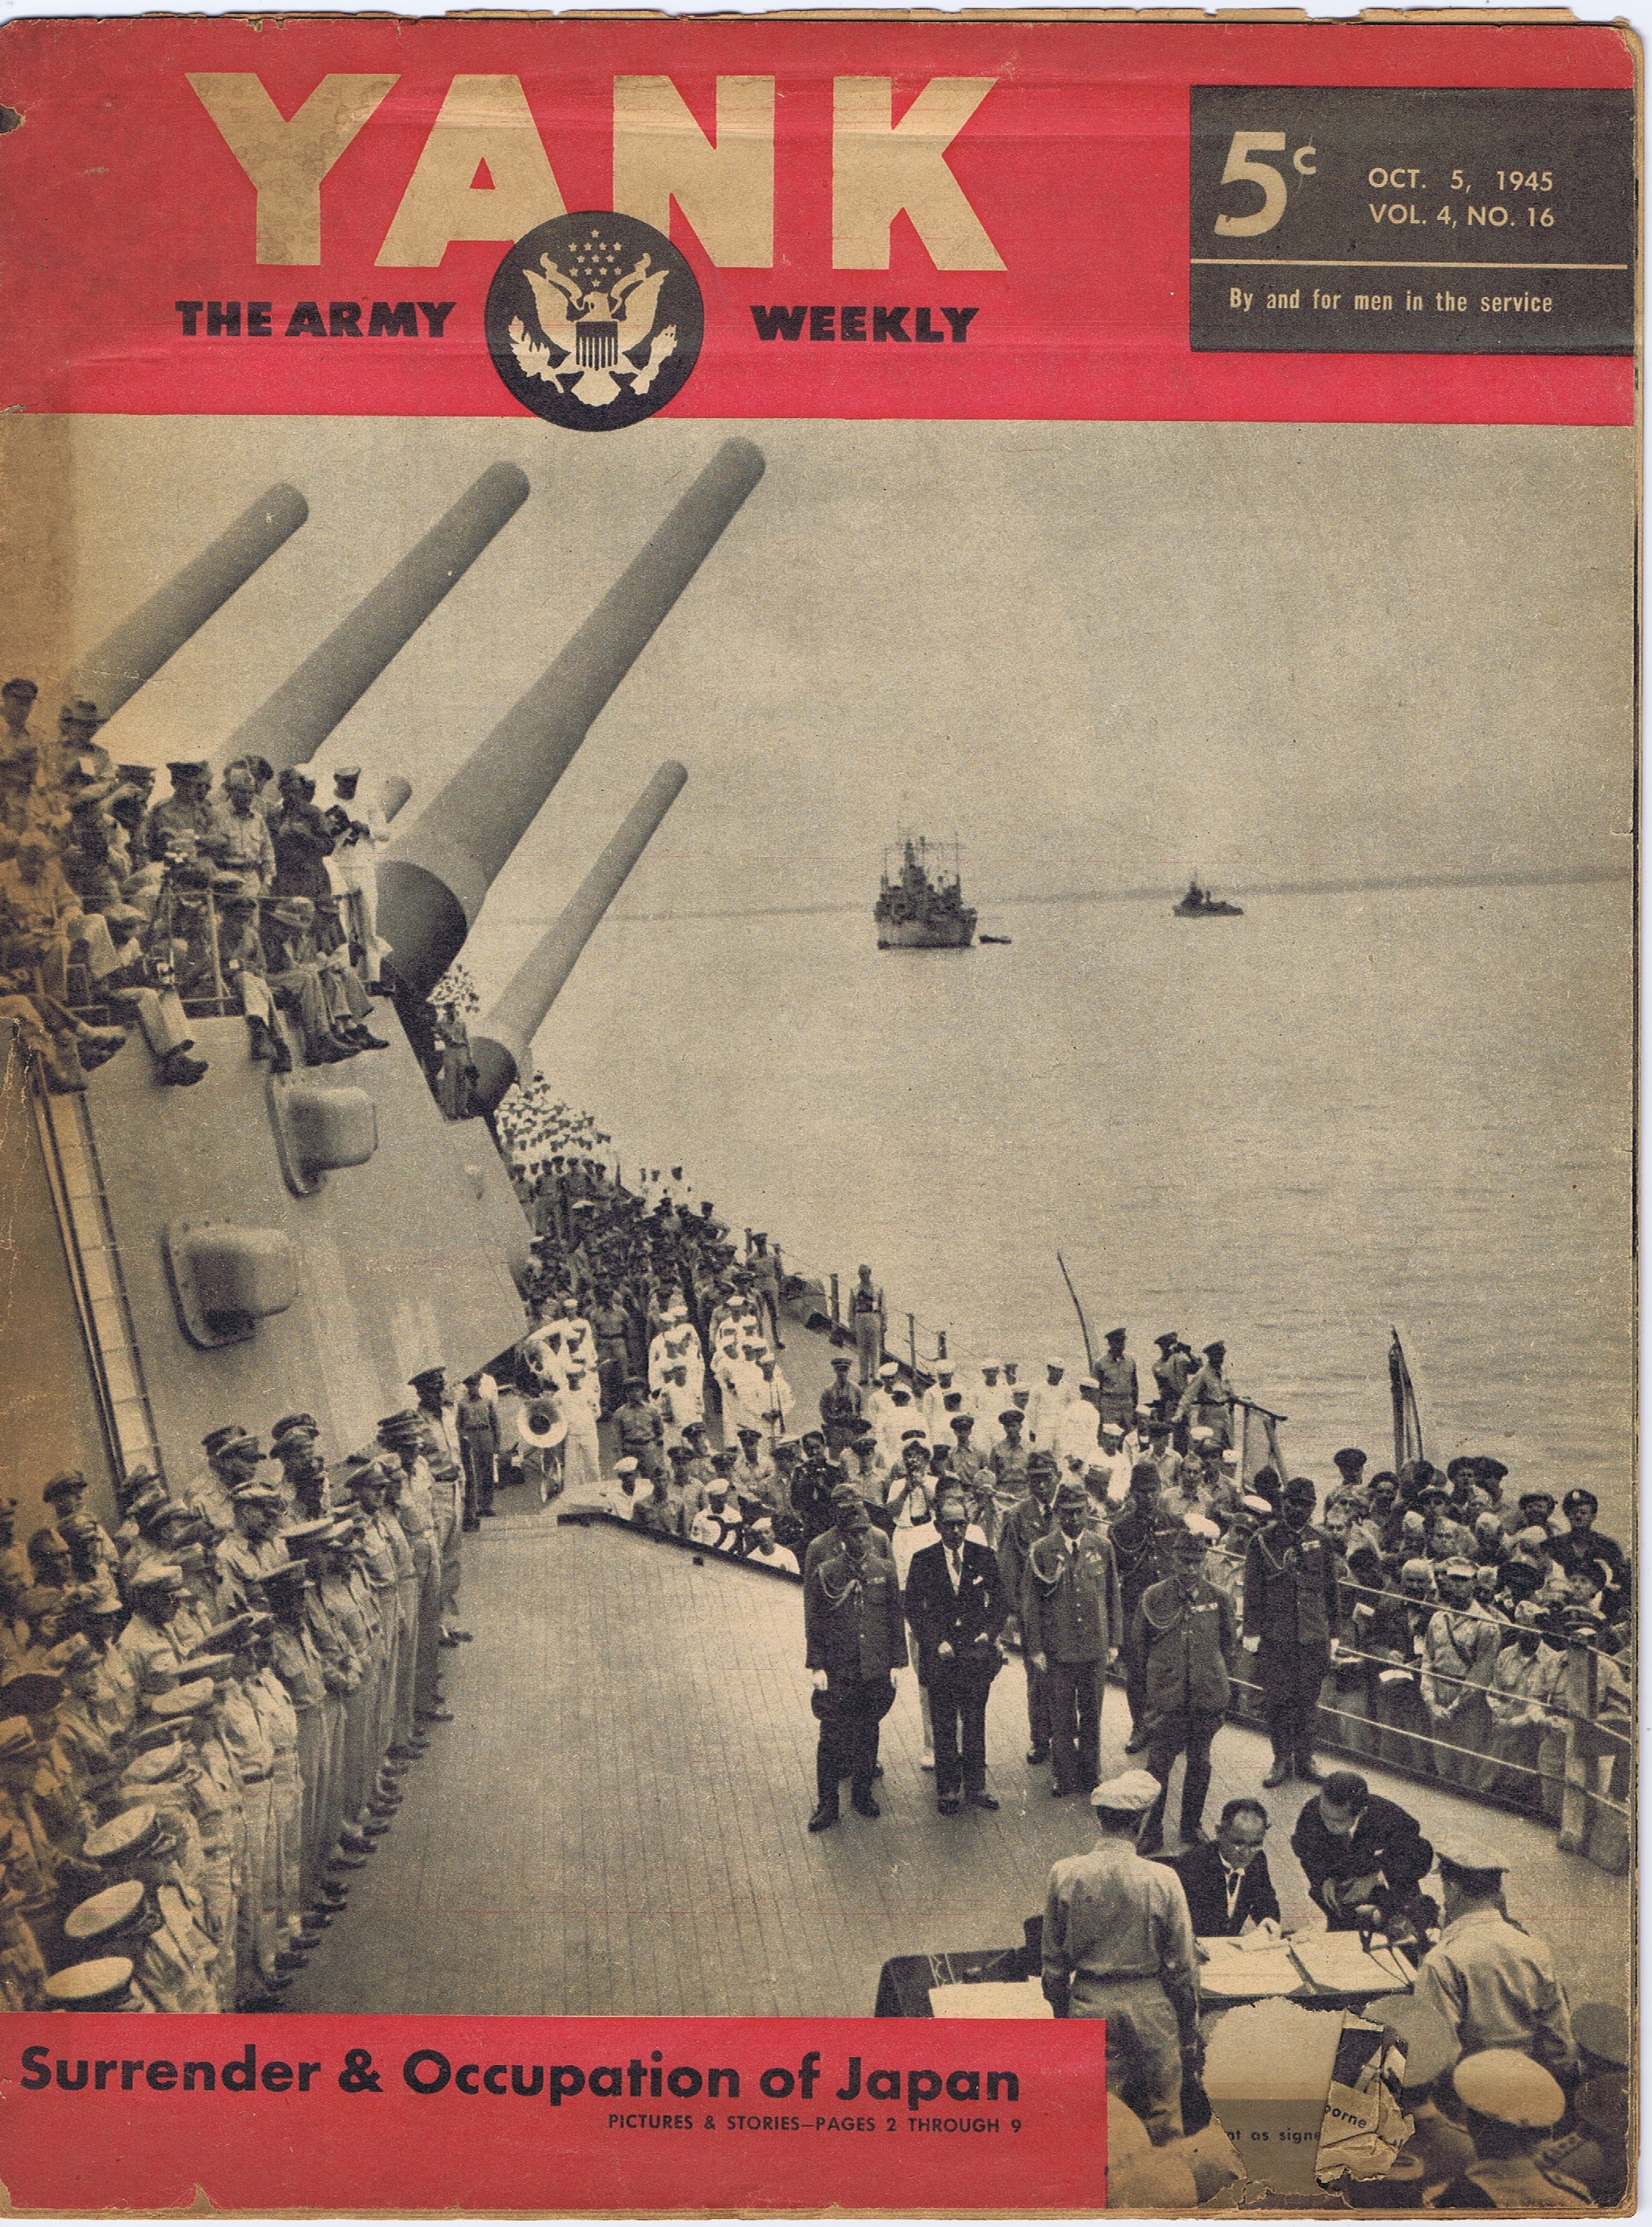 J220	YANK, THE ARMY WEEKLY OCTOBER 5, 1945